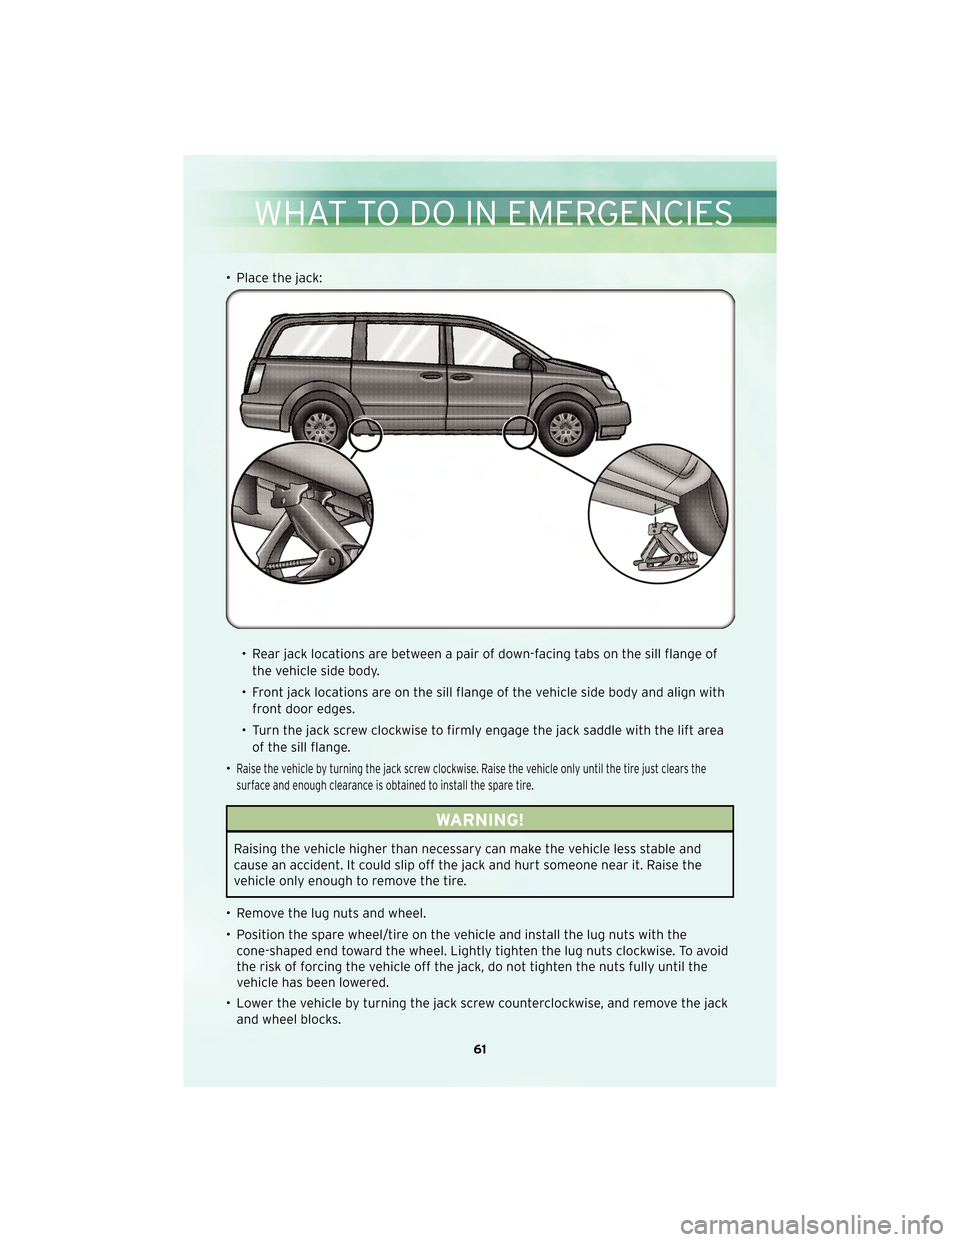 CHRYSLER TOWN AND COUNTRY 2010 5.G User Guide • Place the jack:• Rear jack locations are between a pair of down-facing tabs on the sill flange ofthe vehicle side body.
• Front jack locations are on the sill flange of the vehicle side body a